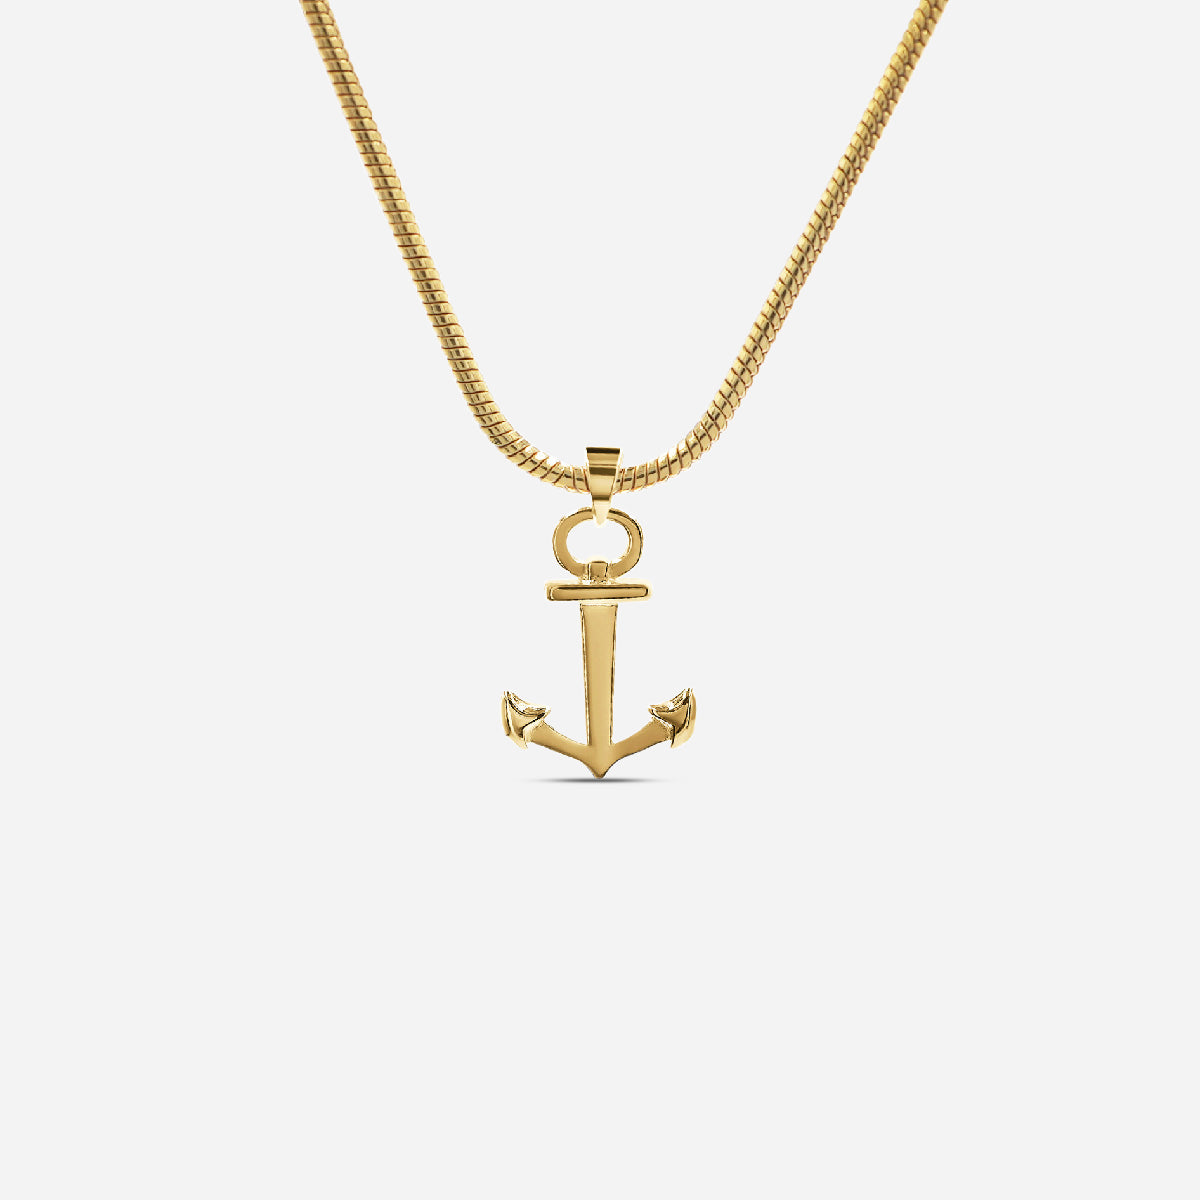 Kids necklace "Anchor" - gold